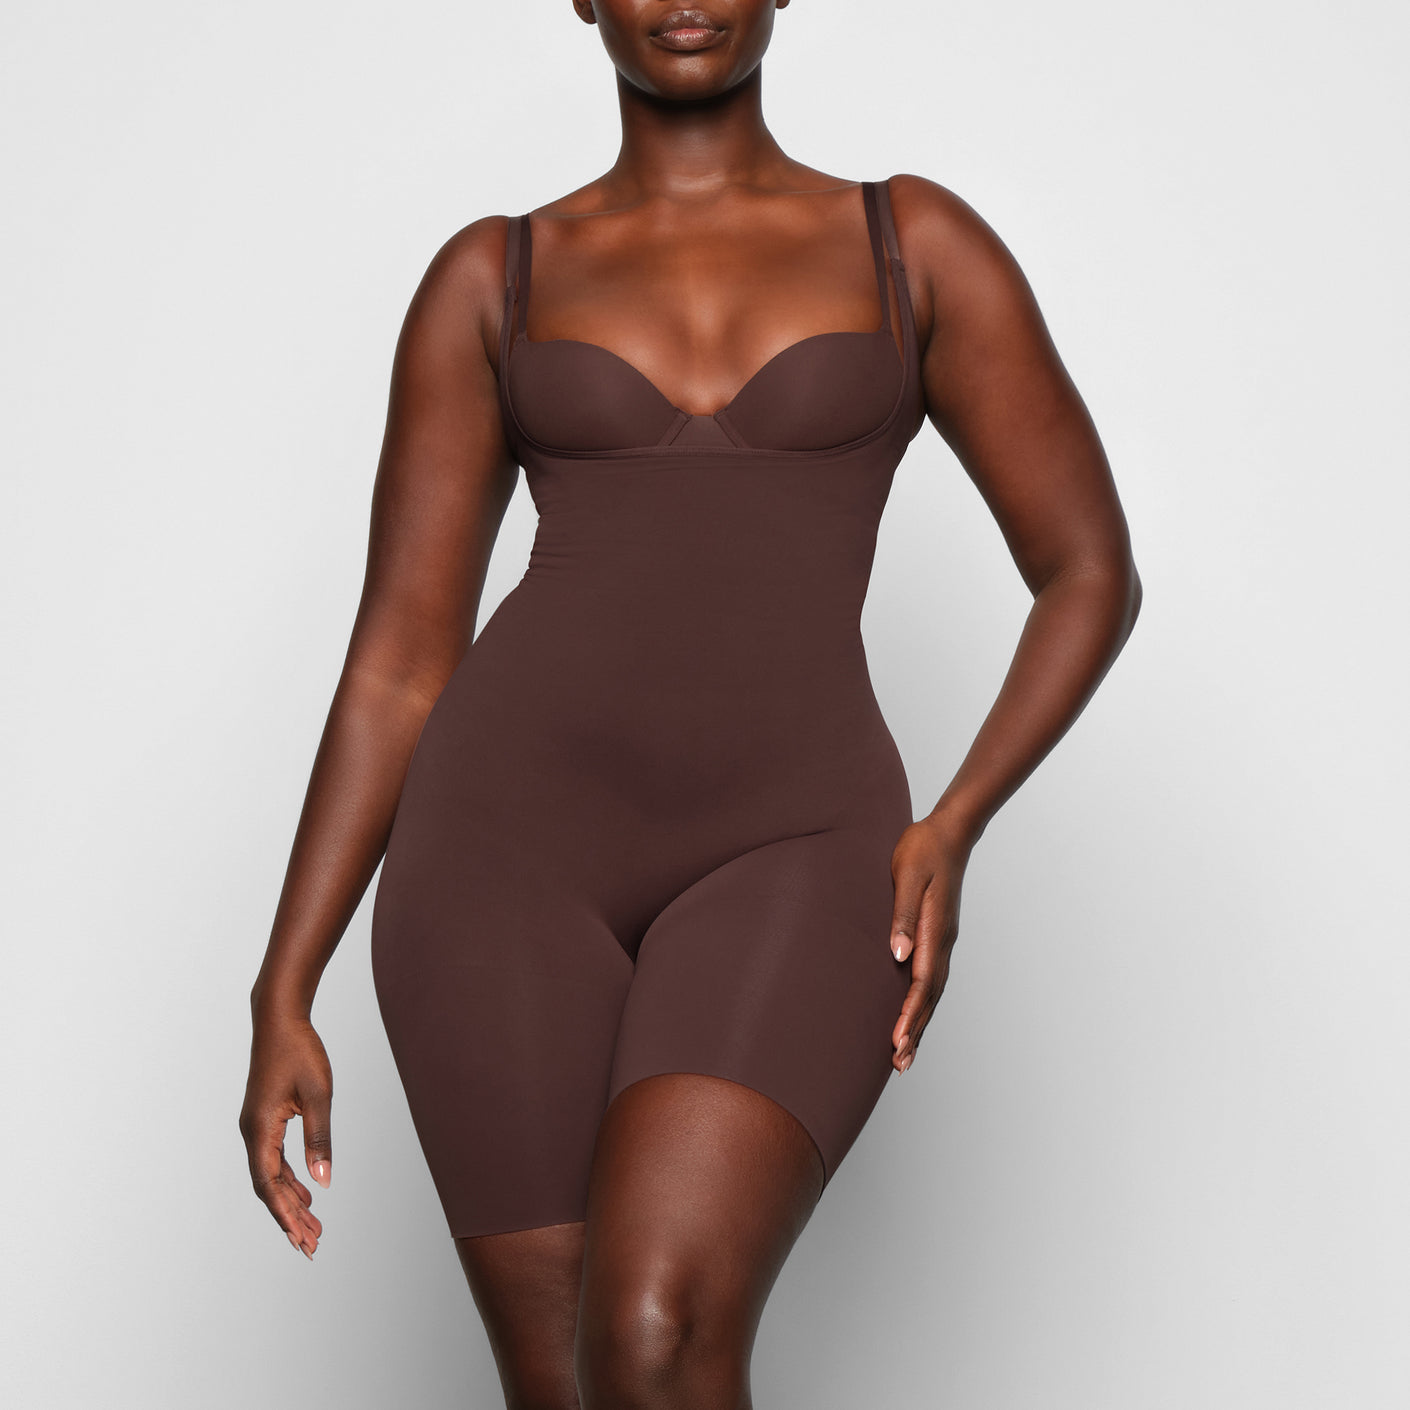 I'm obsessed with this shapewear that you can absolutely wear as a bod